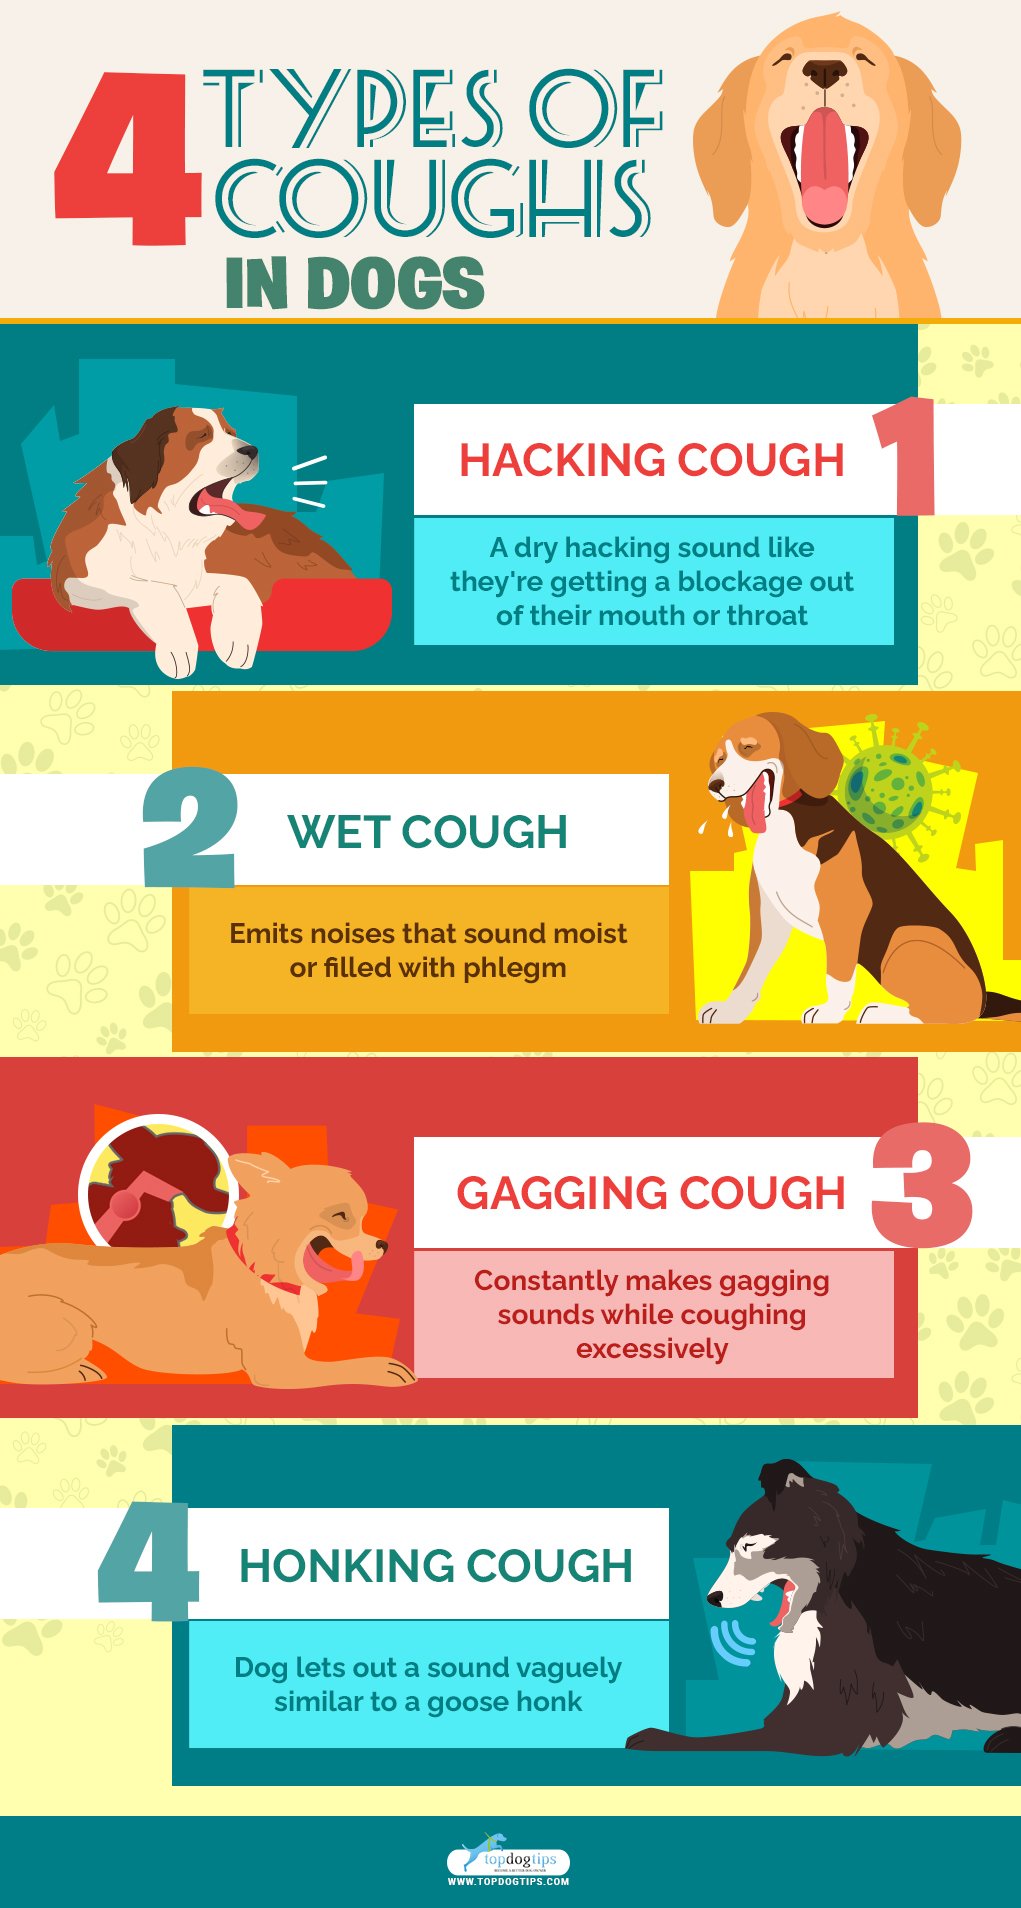 Coughing, Gagging and Choking in Dogs